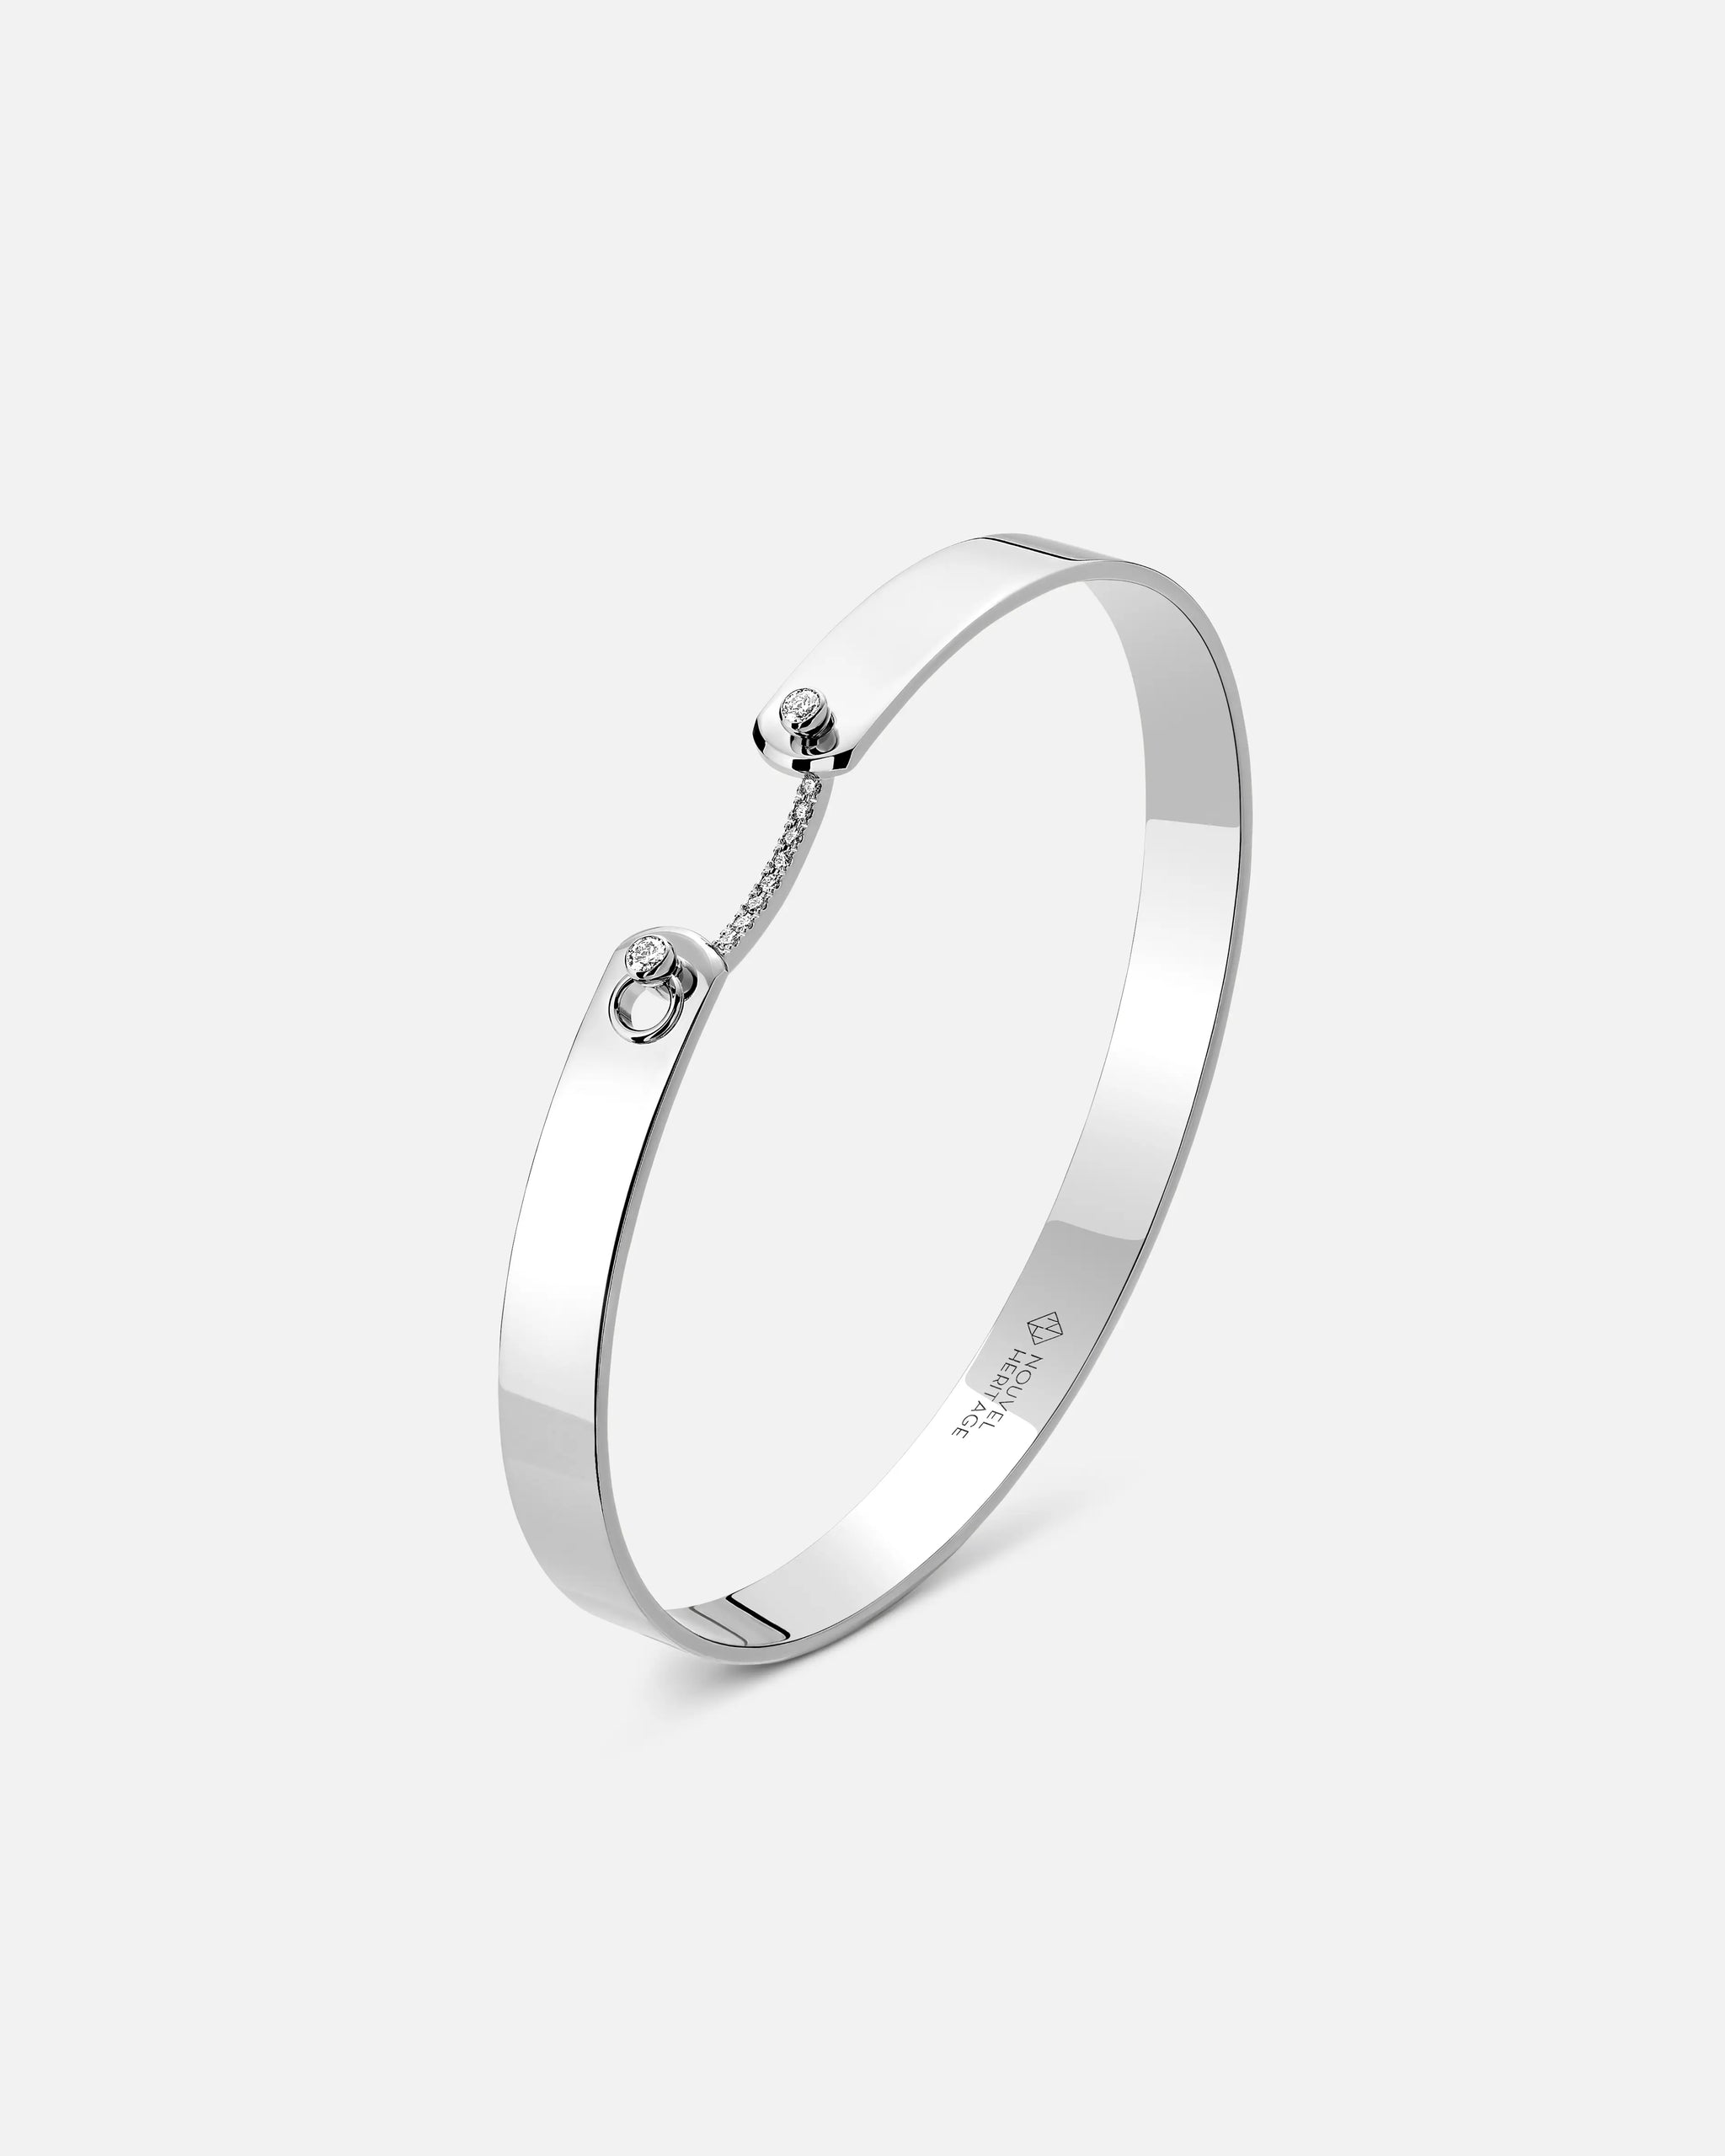 Business Meeting GM Mood Bangle in White Gold - 1 - Nouvel Heritage